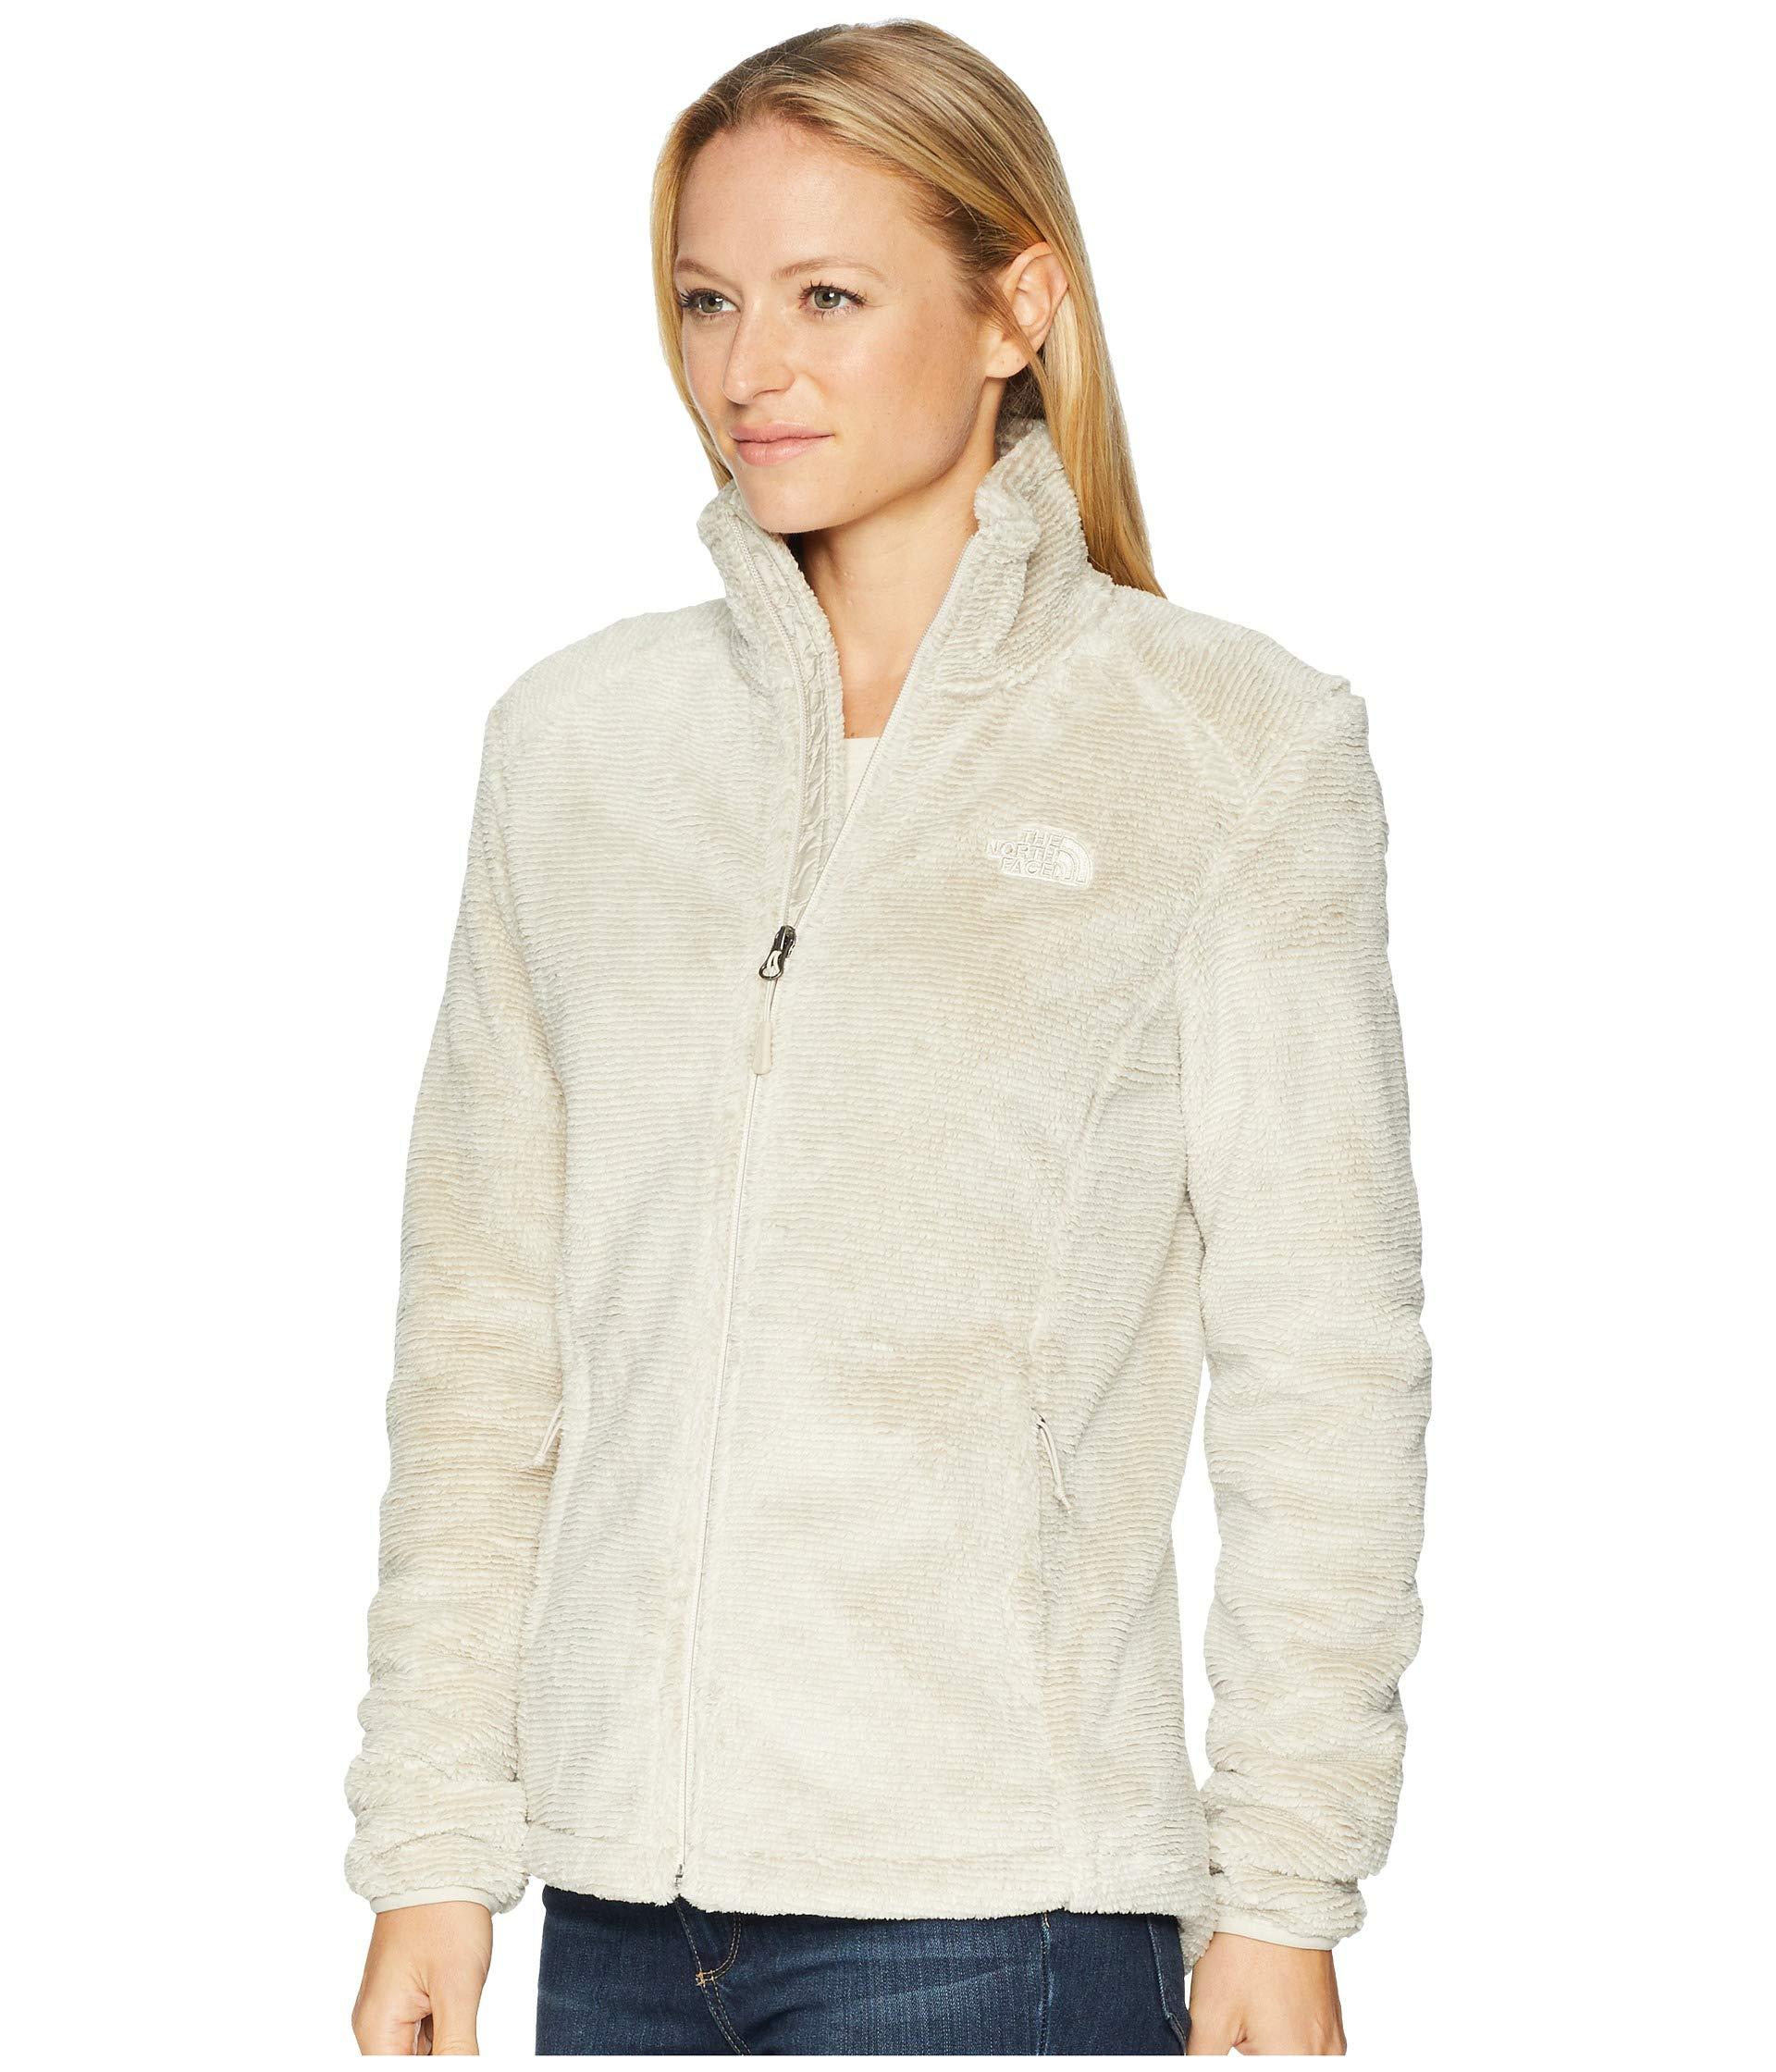 The North Face Fleece Osito 2 Jacket in White - Lyst